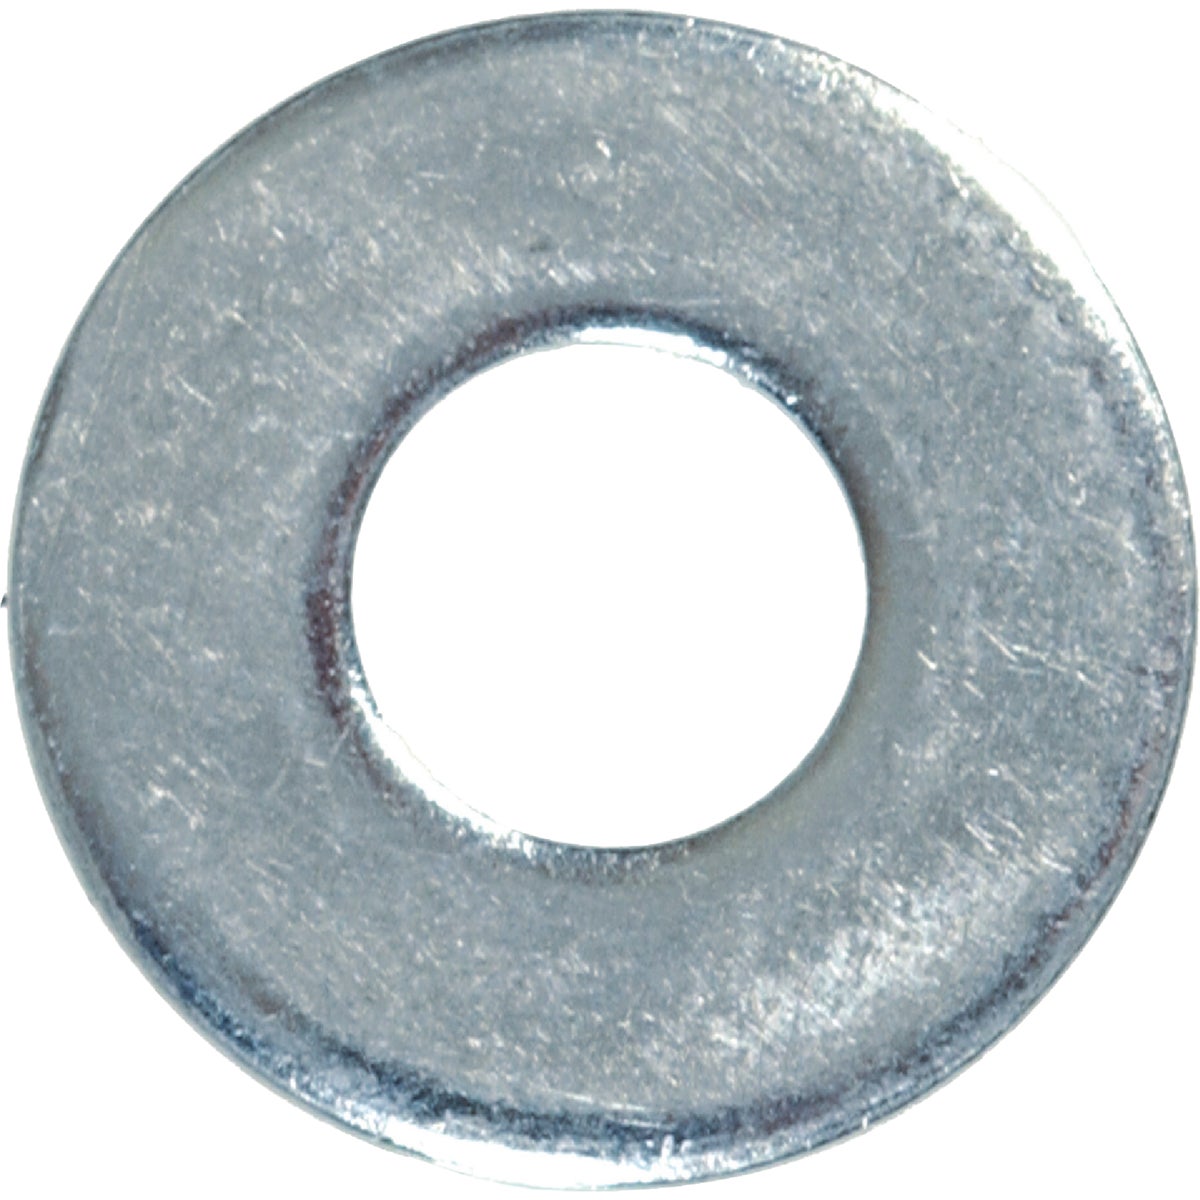 Item 710601, Zinc flat washer is used to spread the load of a screwed fastening or when 